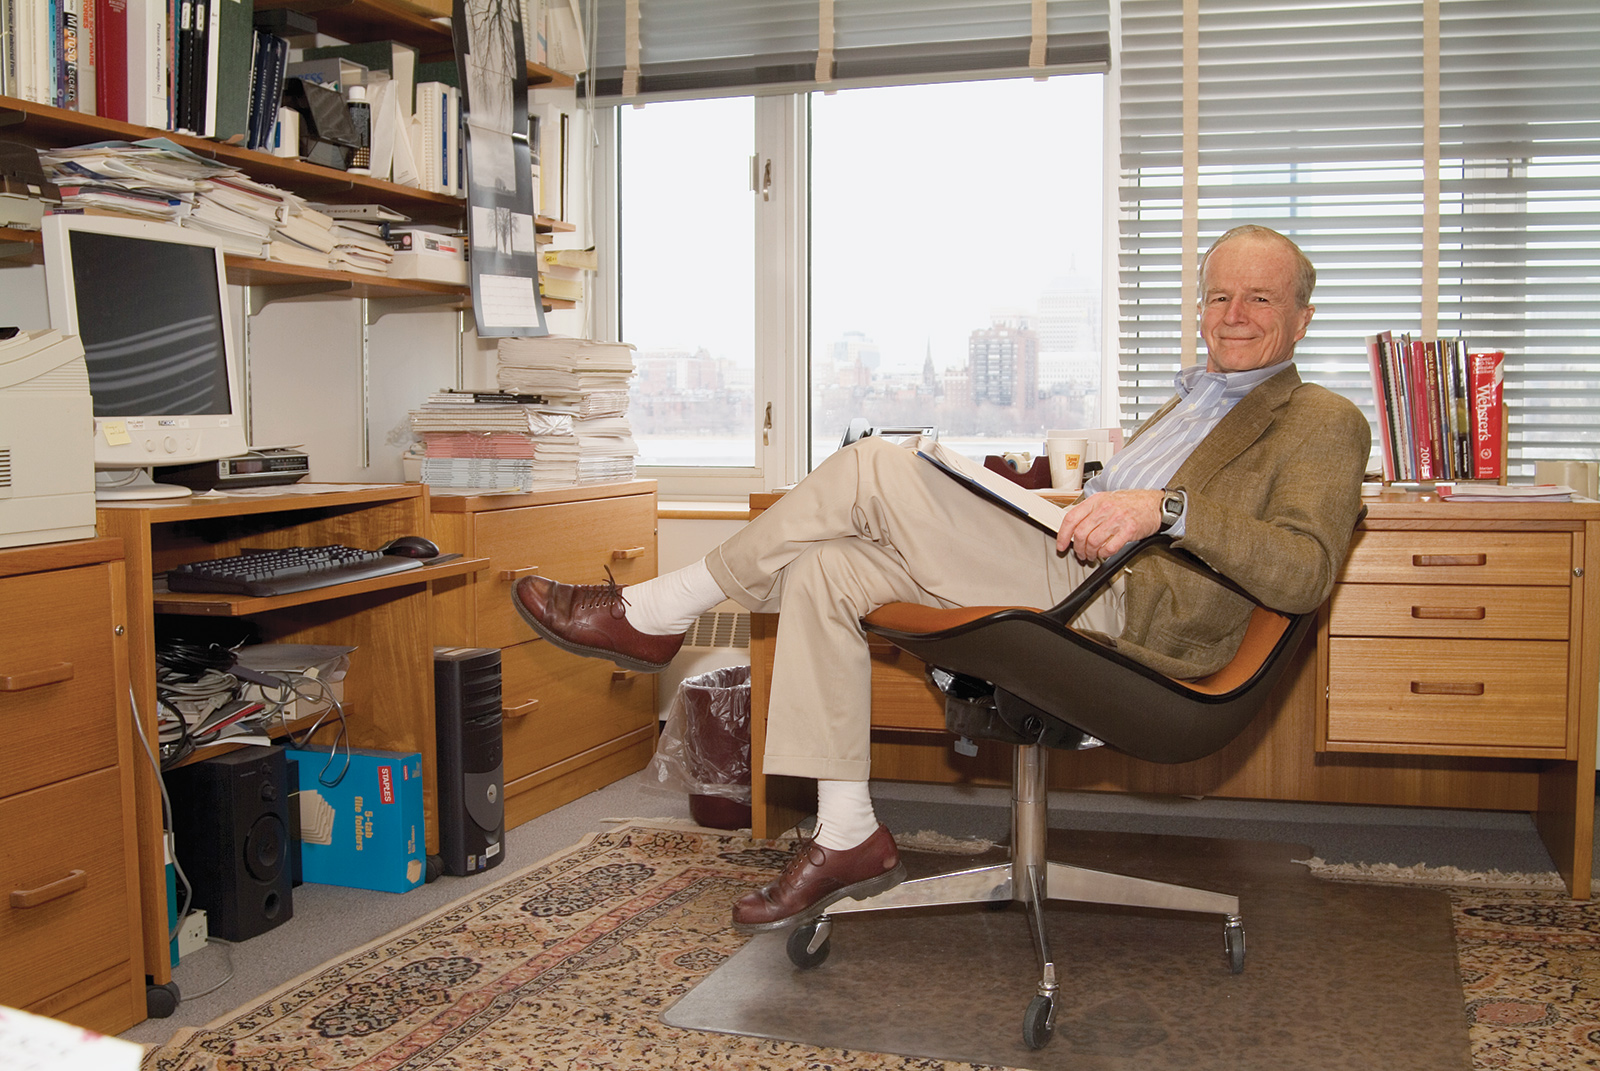 Professor Emeritus John D. C. Little ’48, PhD ’55 sits at a desk with his legs crossed in his office